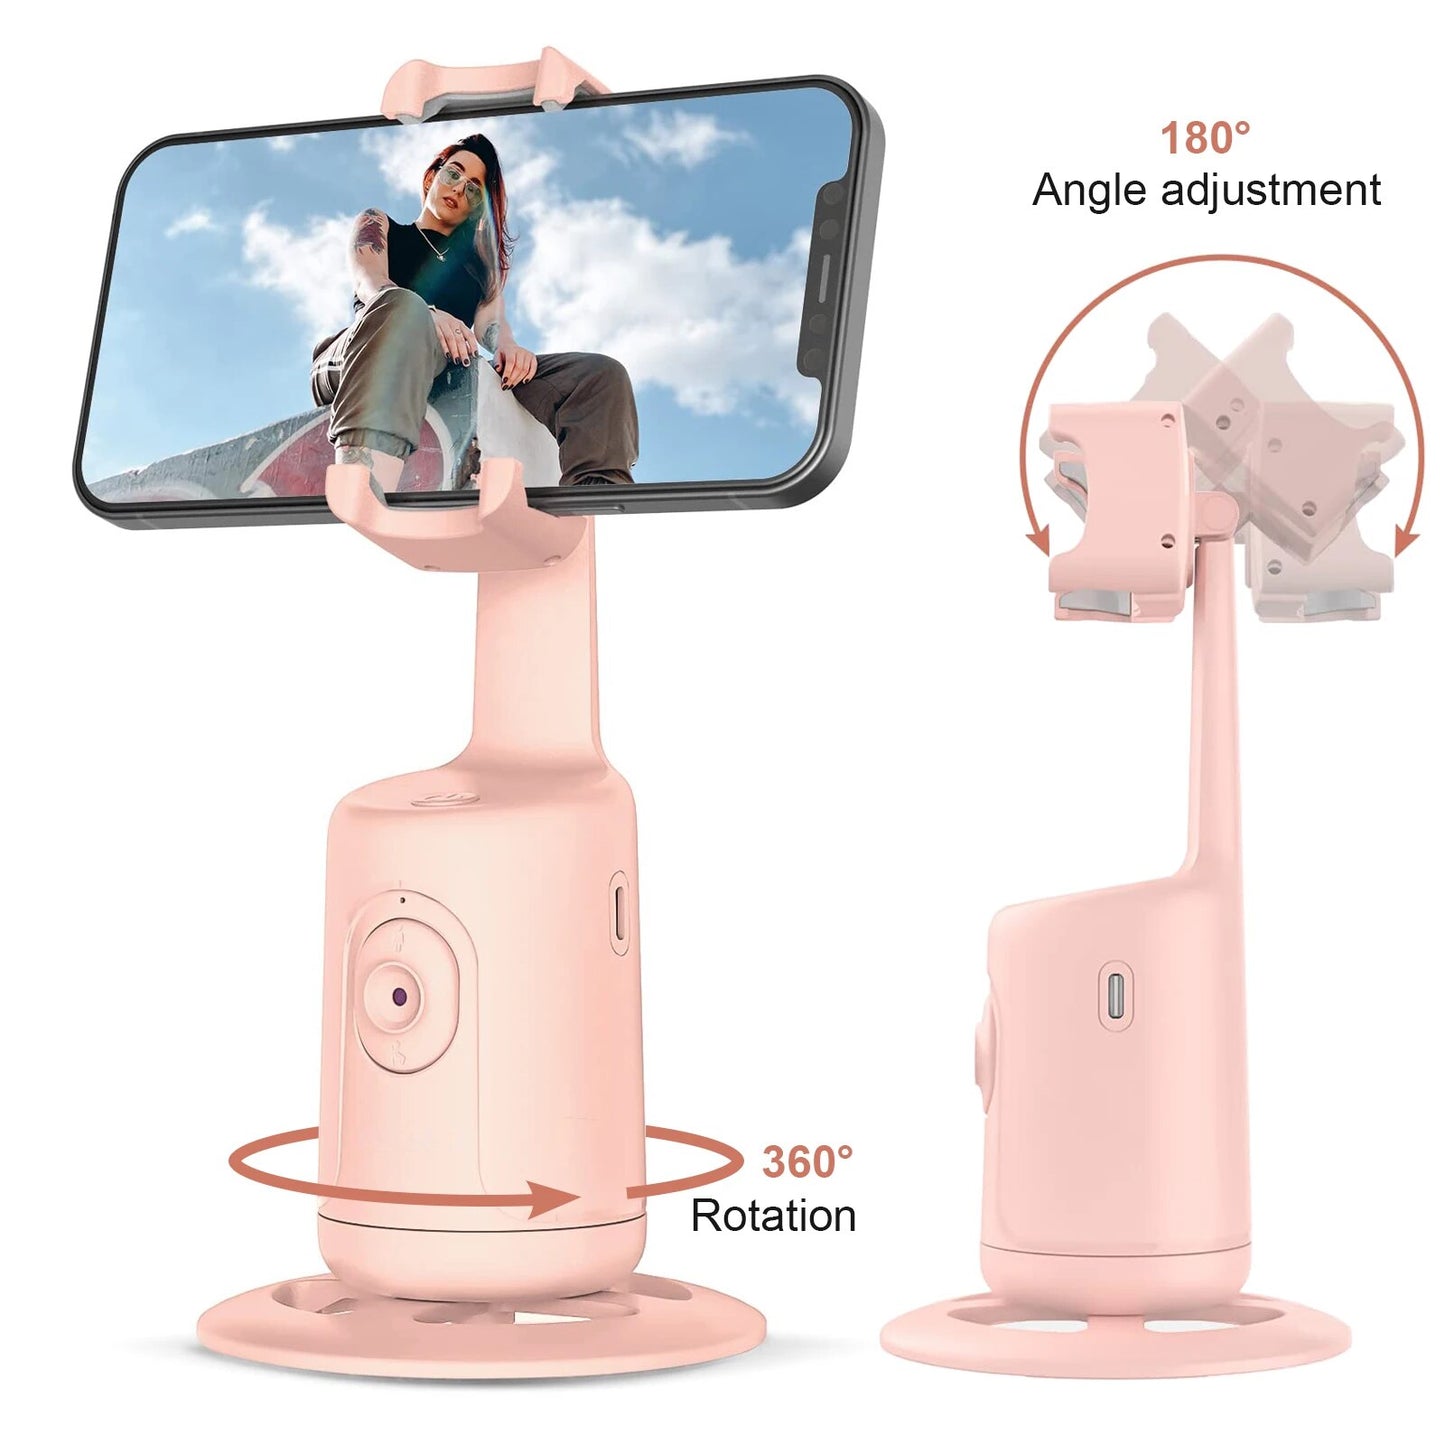 Auto Face Tracking Tripod, 360° Rotation Camera Phone Holder Auto Fast Following, Rechargeable Phone Stand for Live Video, Vlog